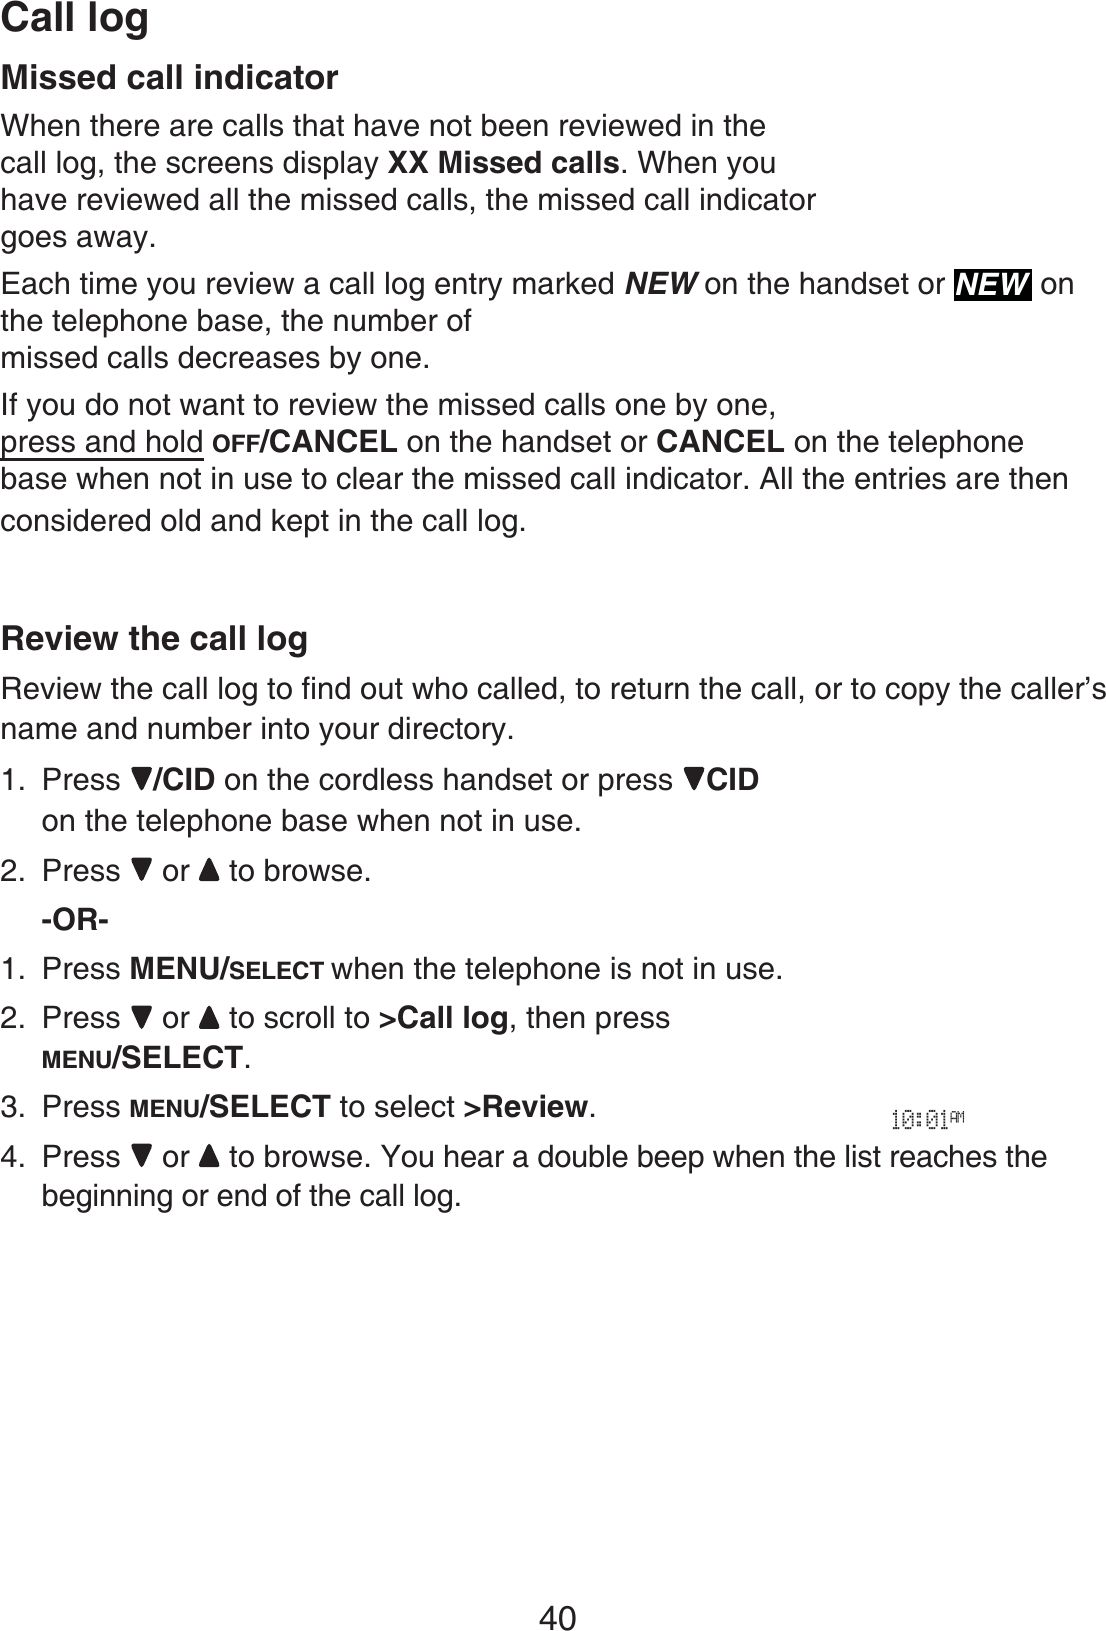 Call log40Missed call indicatorWhen there are calls that have not been reviewed in the call log, the screens display XX Missed calls. When you have reviewed all the missed calls, the missed call indicator goes away.Each time you review a call log entry marked NEW on the handset or NEW onthe telephone base, the number of missed calls decreases by one.If you do not want to review the missed calls one by one, press and hold OFF/CANCEL on the handset or CANCEL on the telephone base when not in use to clear the missed call indicator. All the entries are then considered old and kept in the call log.Review the call logReview the call logVQſPFQWVYJQECNNGFto return the call, or to copy the caller’s name and number into your directory. 1. Press /CID on the cordless handset or press  CIDon the telephone base when not in use.2. Press  or to browse.-OR-1. Press MENU/SELECT when the telephone is not in use.2. Press  or to scroll to &gt;Call log, then press MENU/SELECT.3. Press MENU/SELECT to select &gt;Review.4. Press  or to browse. You hear a double beep when the list reaches the beginning or end of the call log.10:01AM